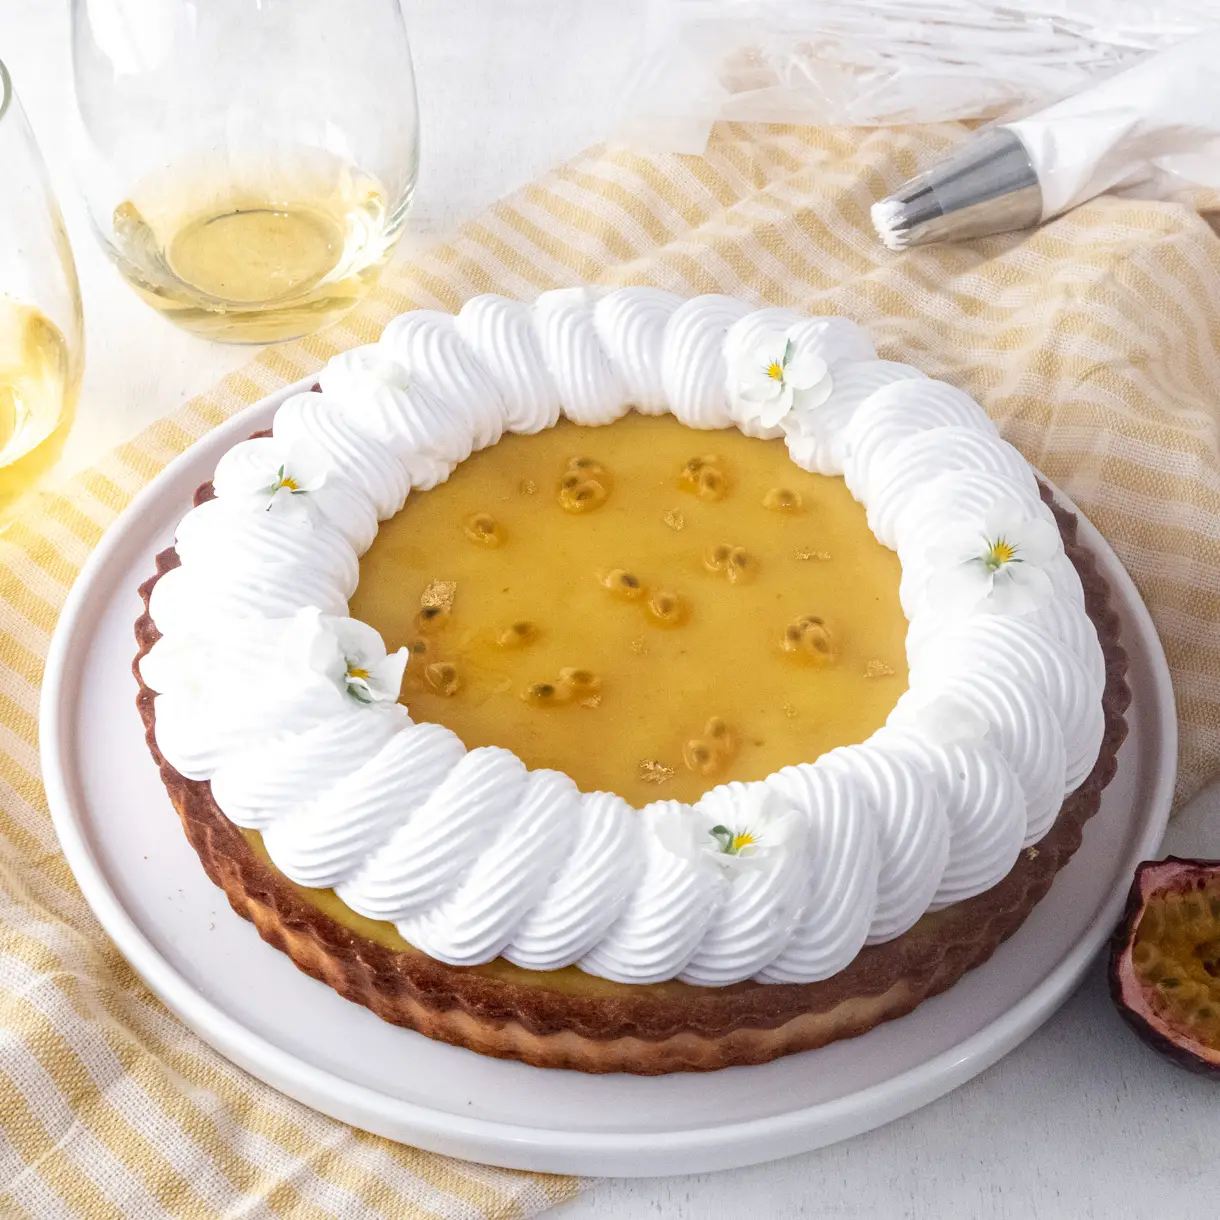 Vegan passionfruit meringue tart on a yellowed stripped tablecloth with wine glass and plates around it.